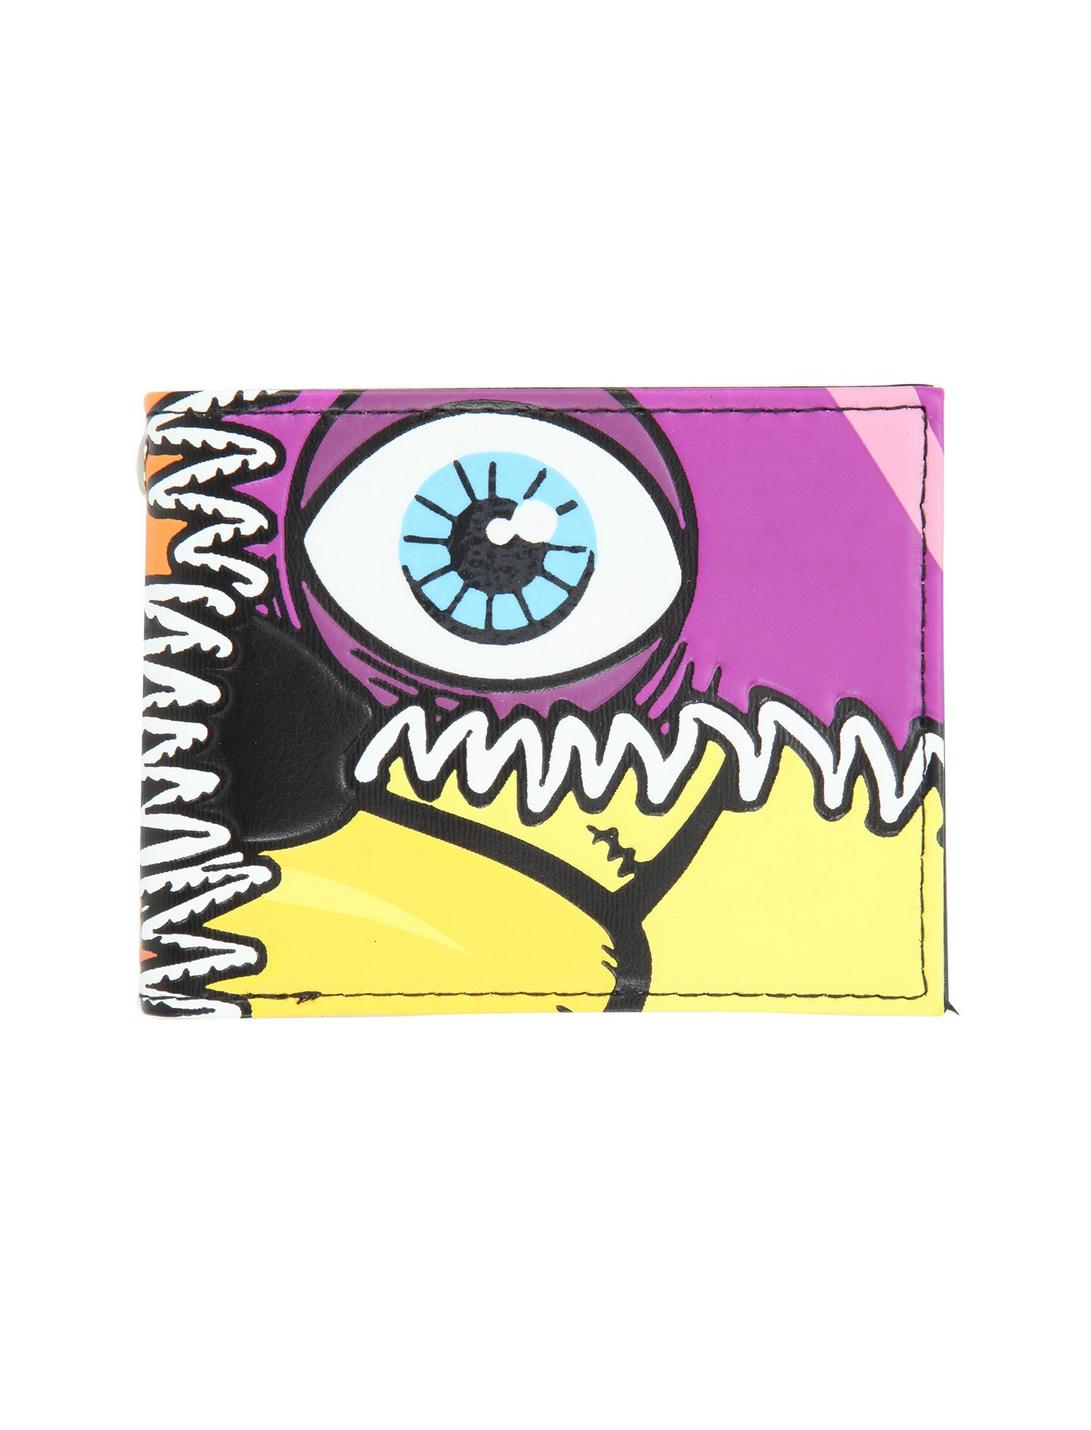 Five Nights At Freddy's Stitched Character Faces Bi-Fold Wallet, , hi-res